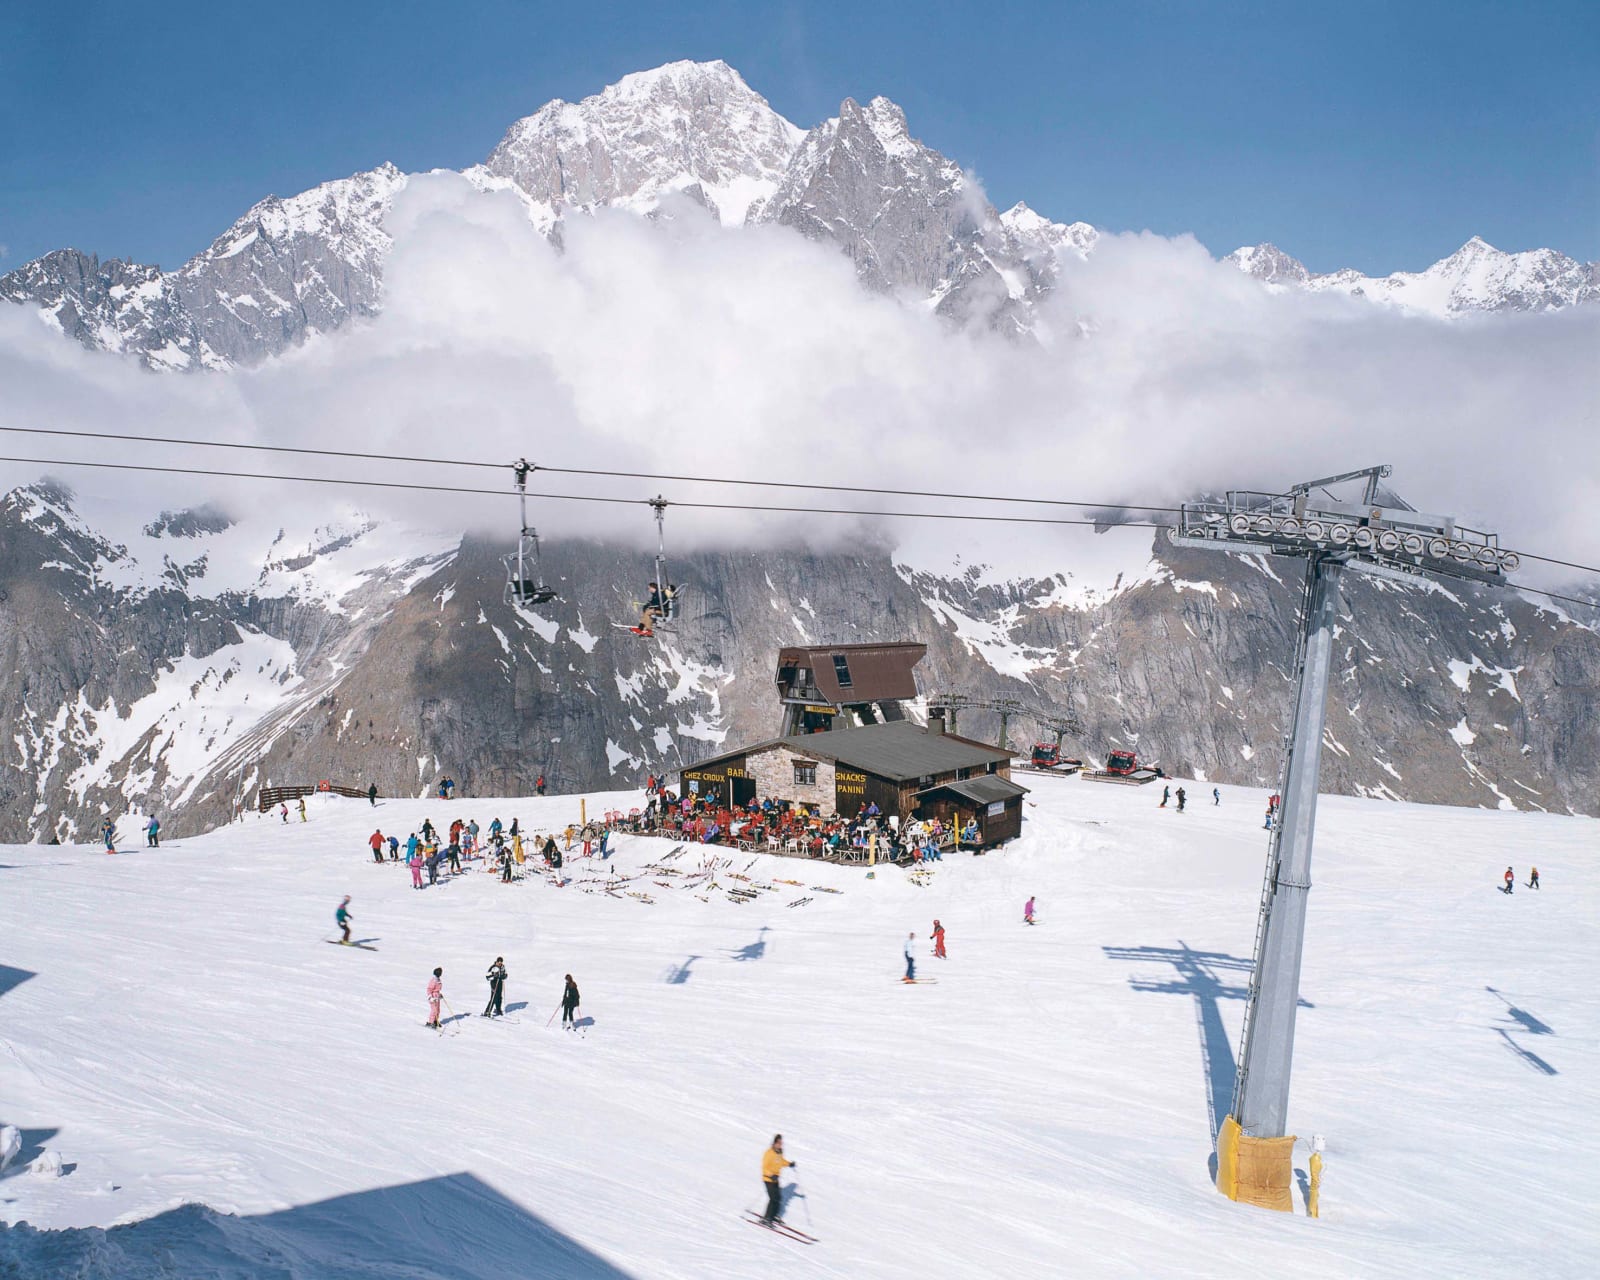 Skiers and chairlift on mountain, Mont Blanc de Courmayeur, by Massimo Vitali